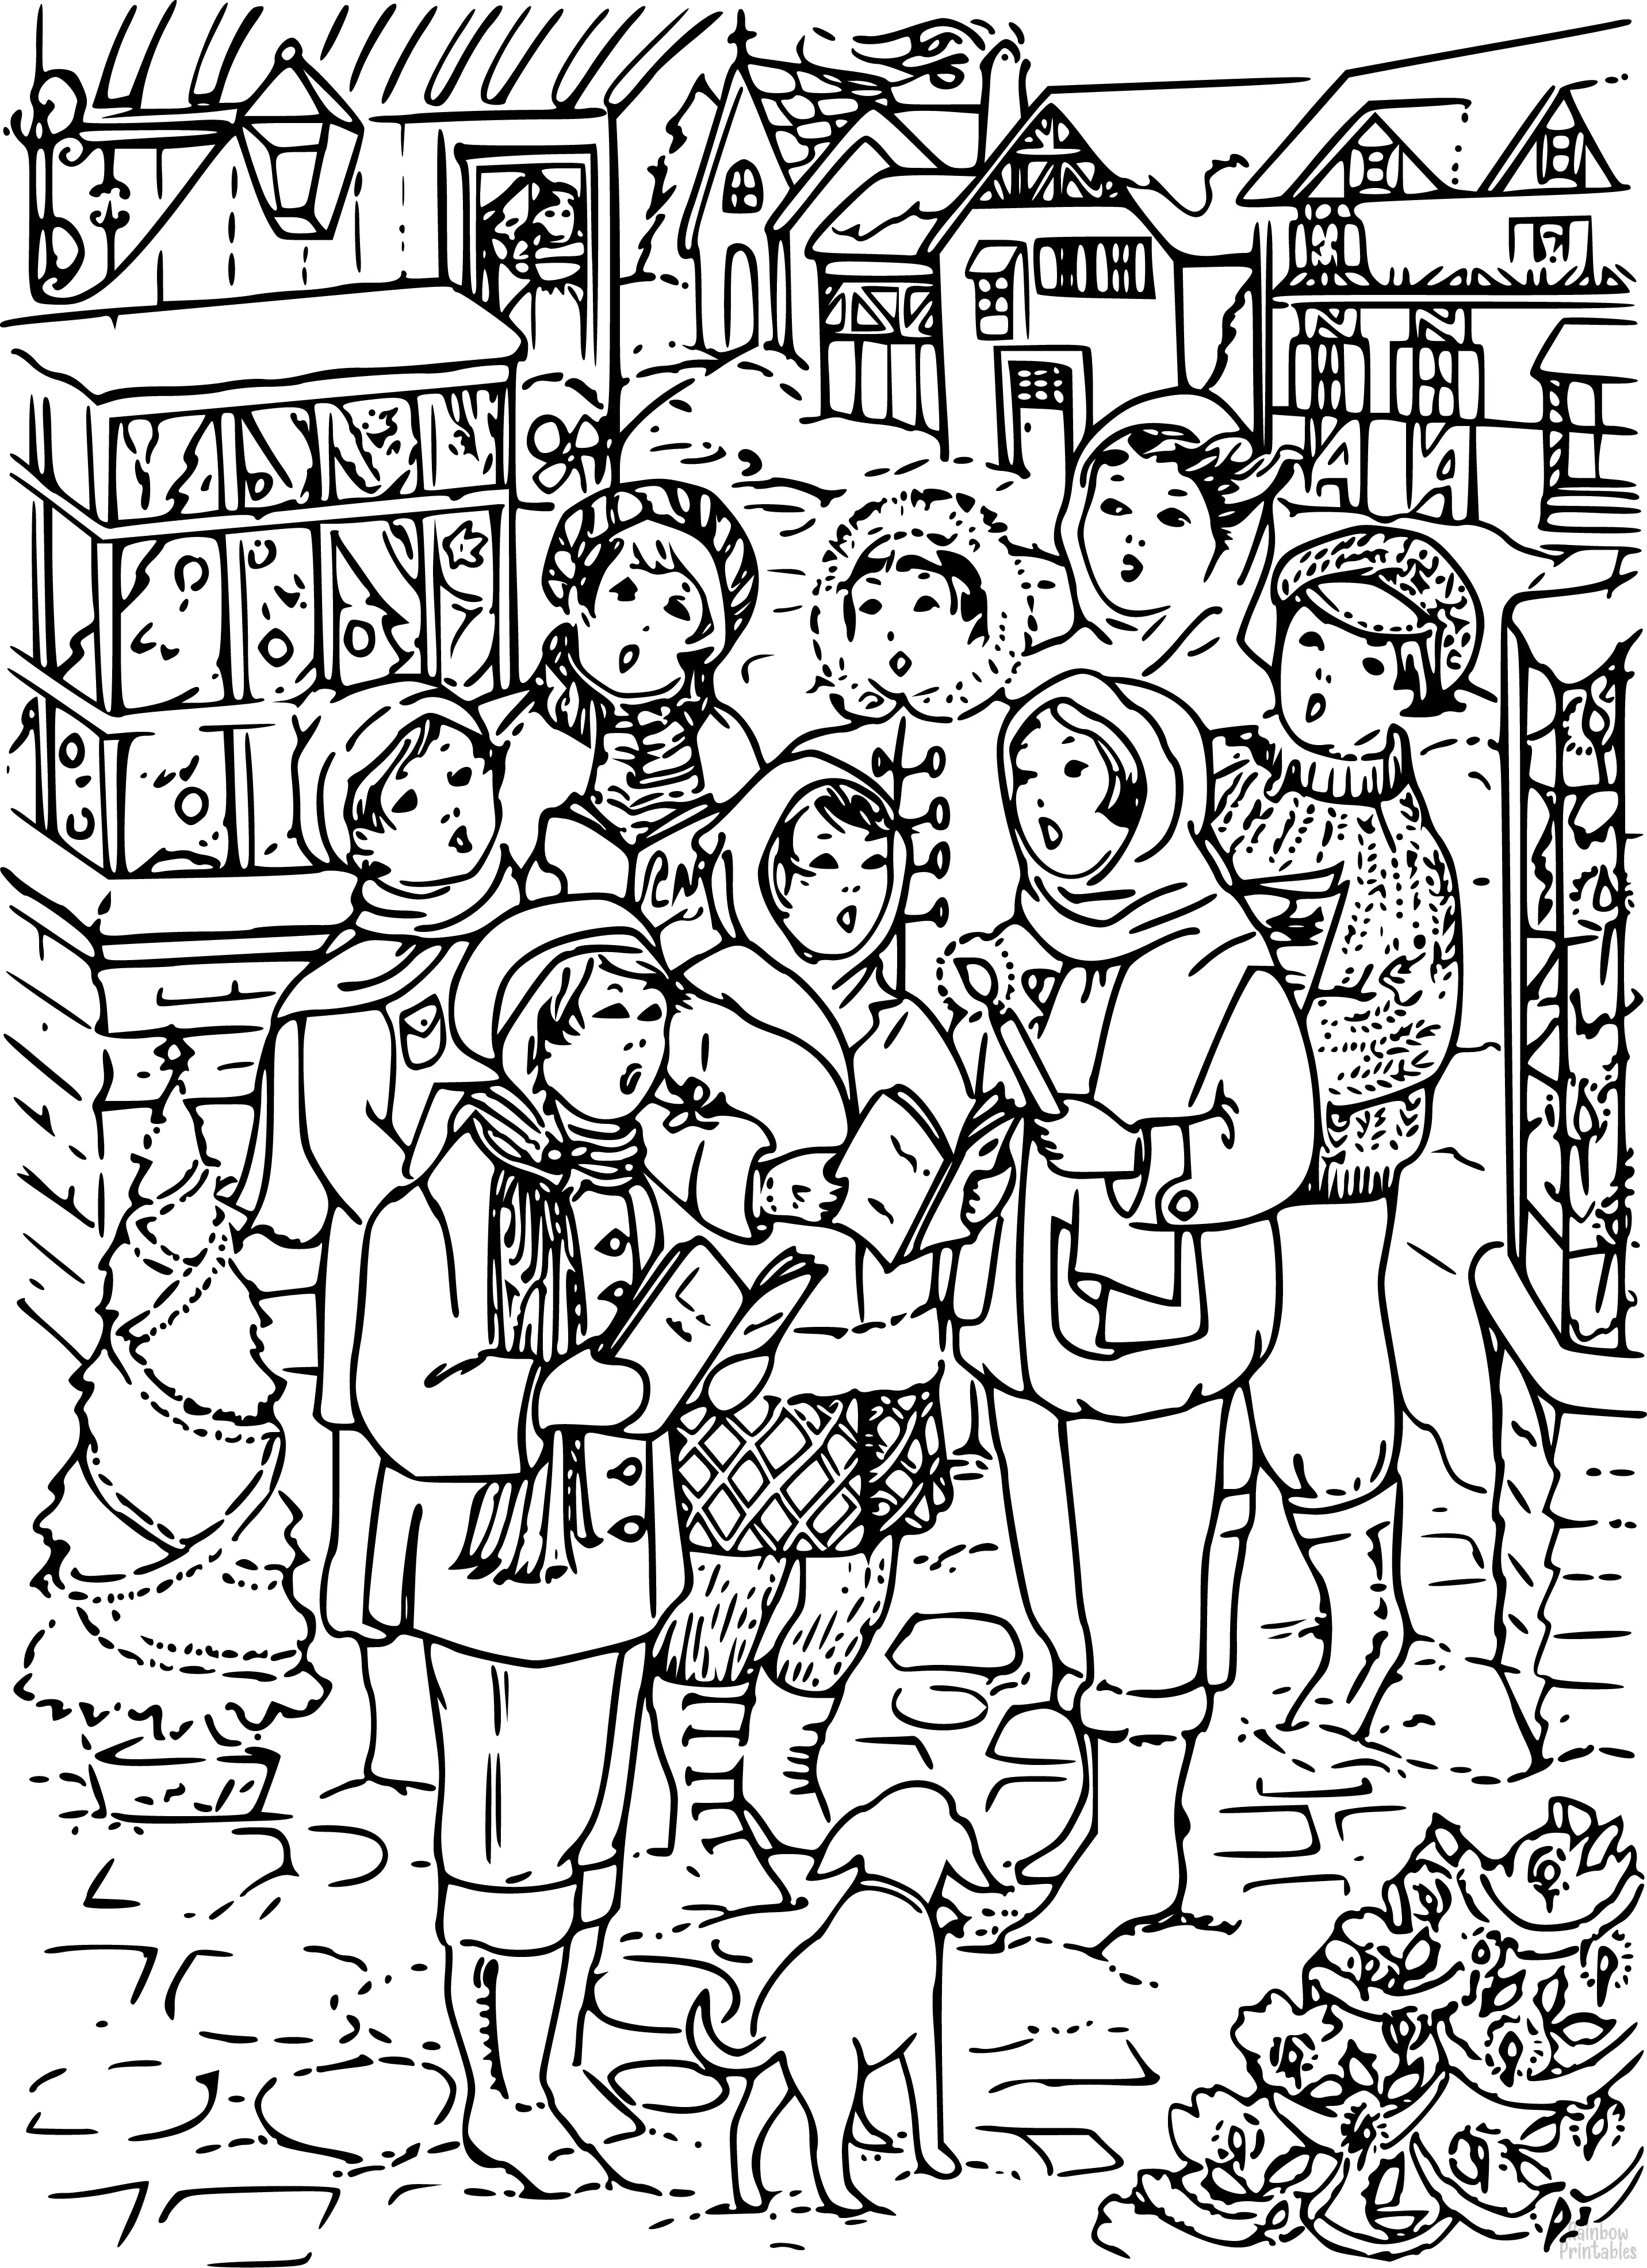 Carolers Christmas Eve Winter Season Drawing Doodle Coloring Book Page Sheets for Kids Activity